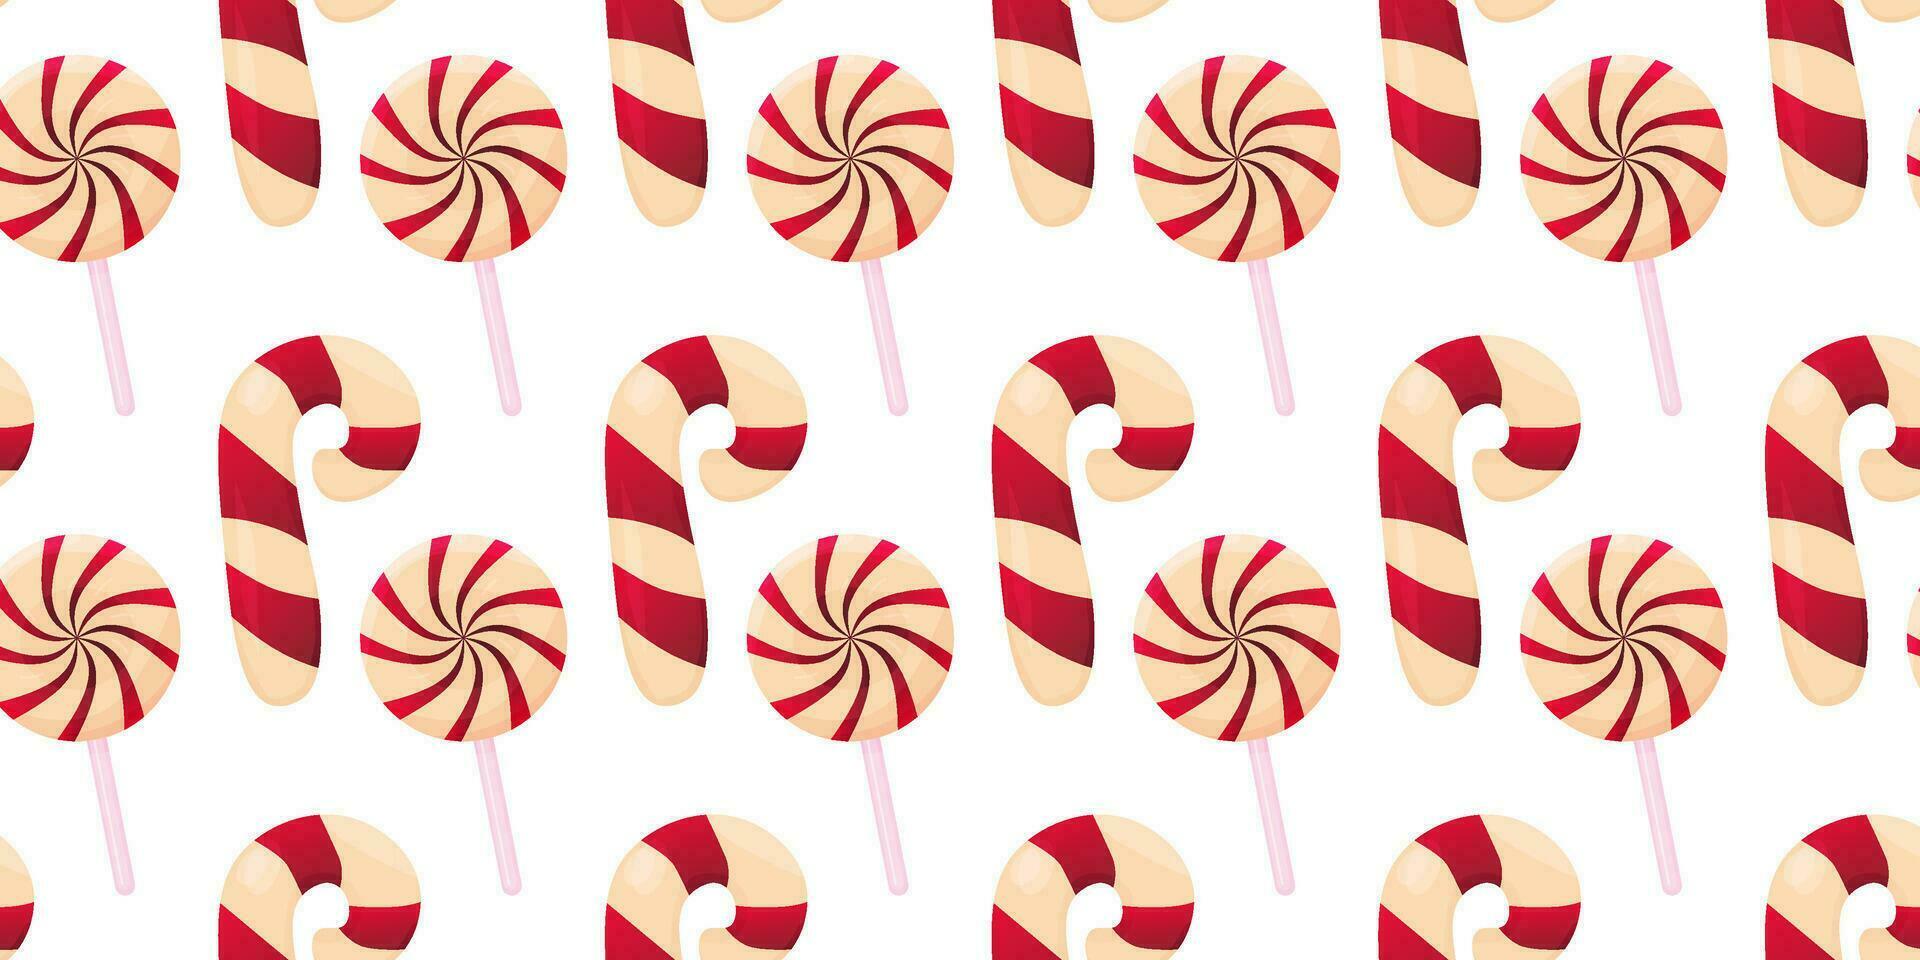 New Year seamless pattern. New Year's texture. Christmas sweets candy cane, lollipop. Vector illustration.